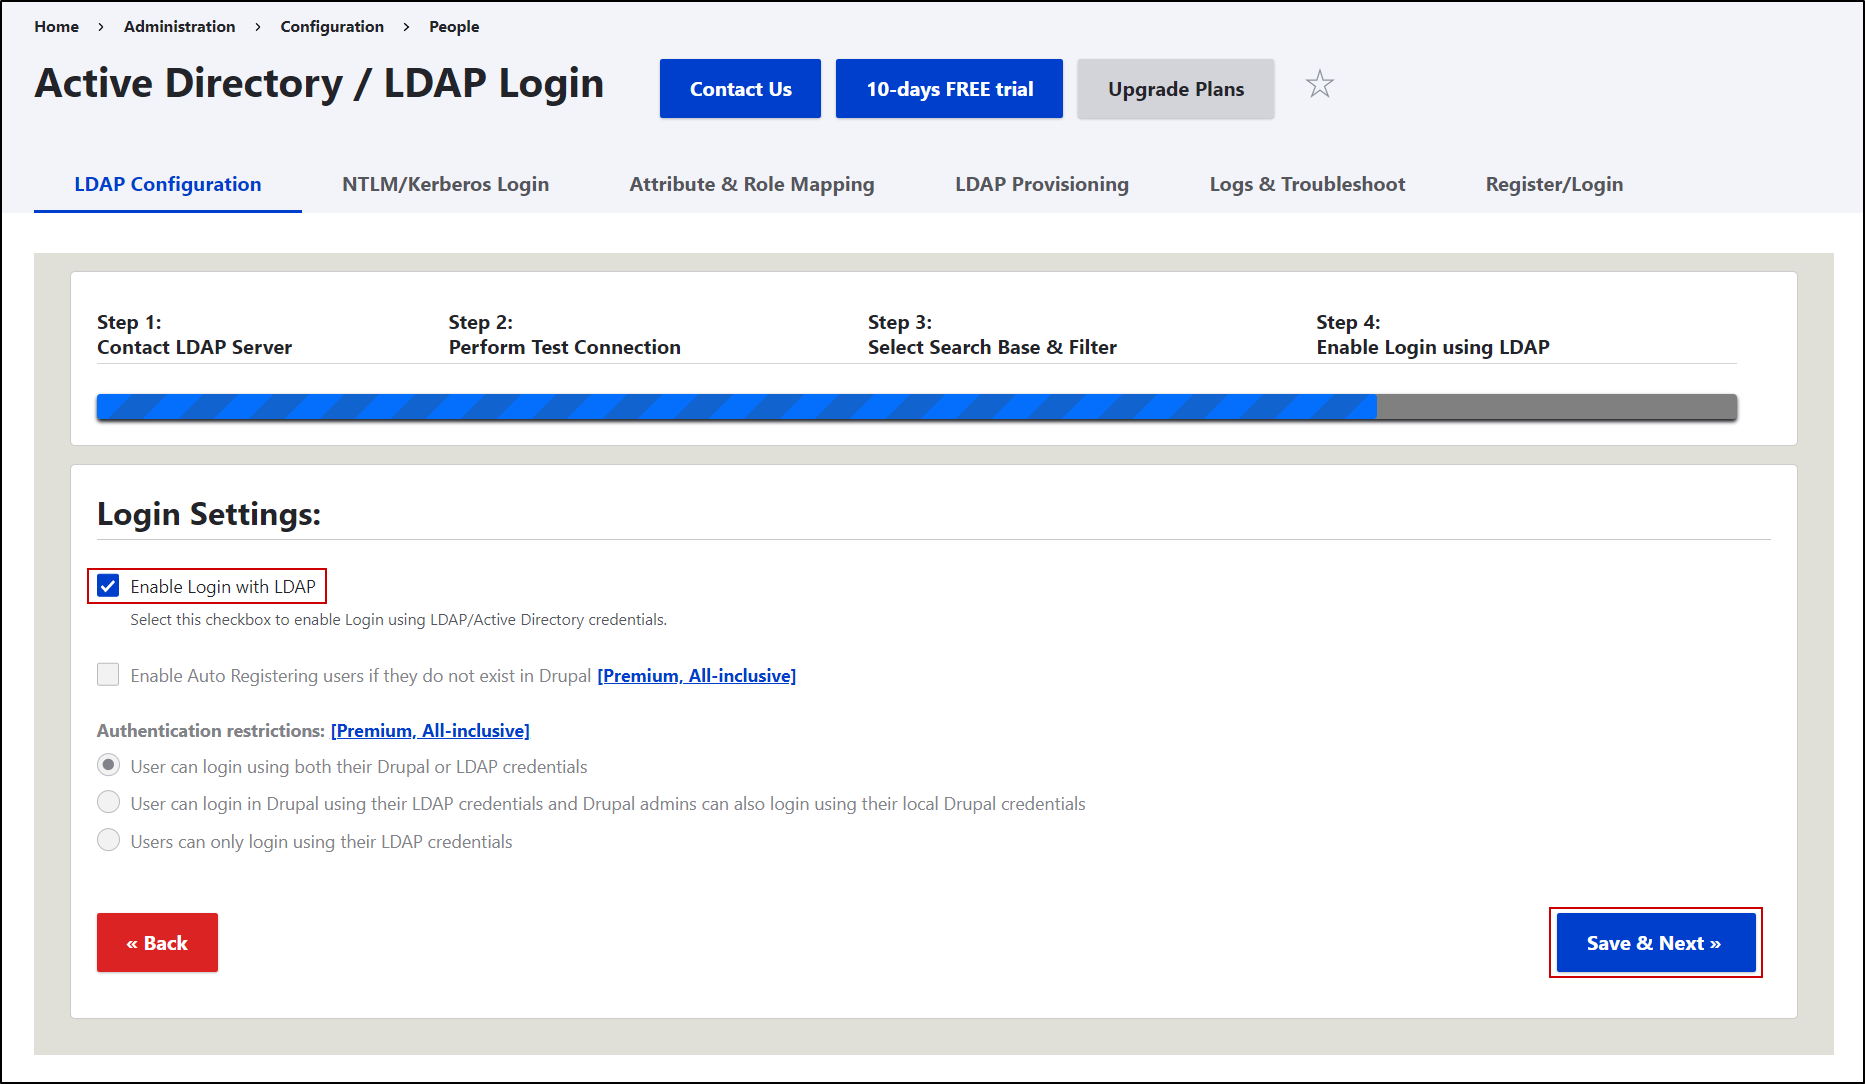 Drupal LDAP Login and Active Directory SSO Enable Login with LDAP